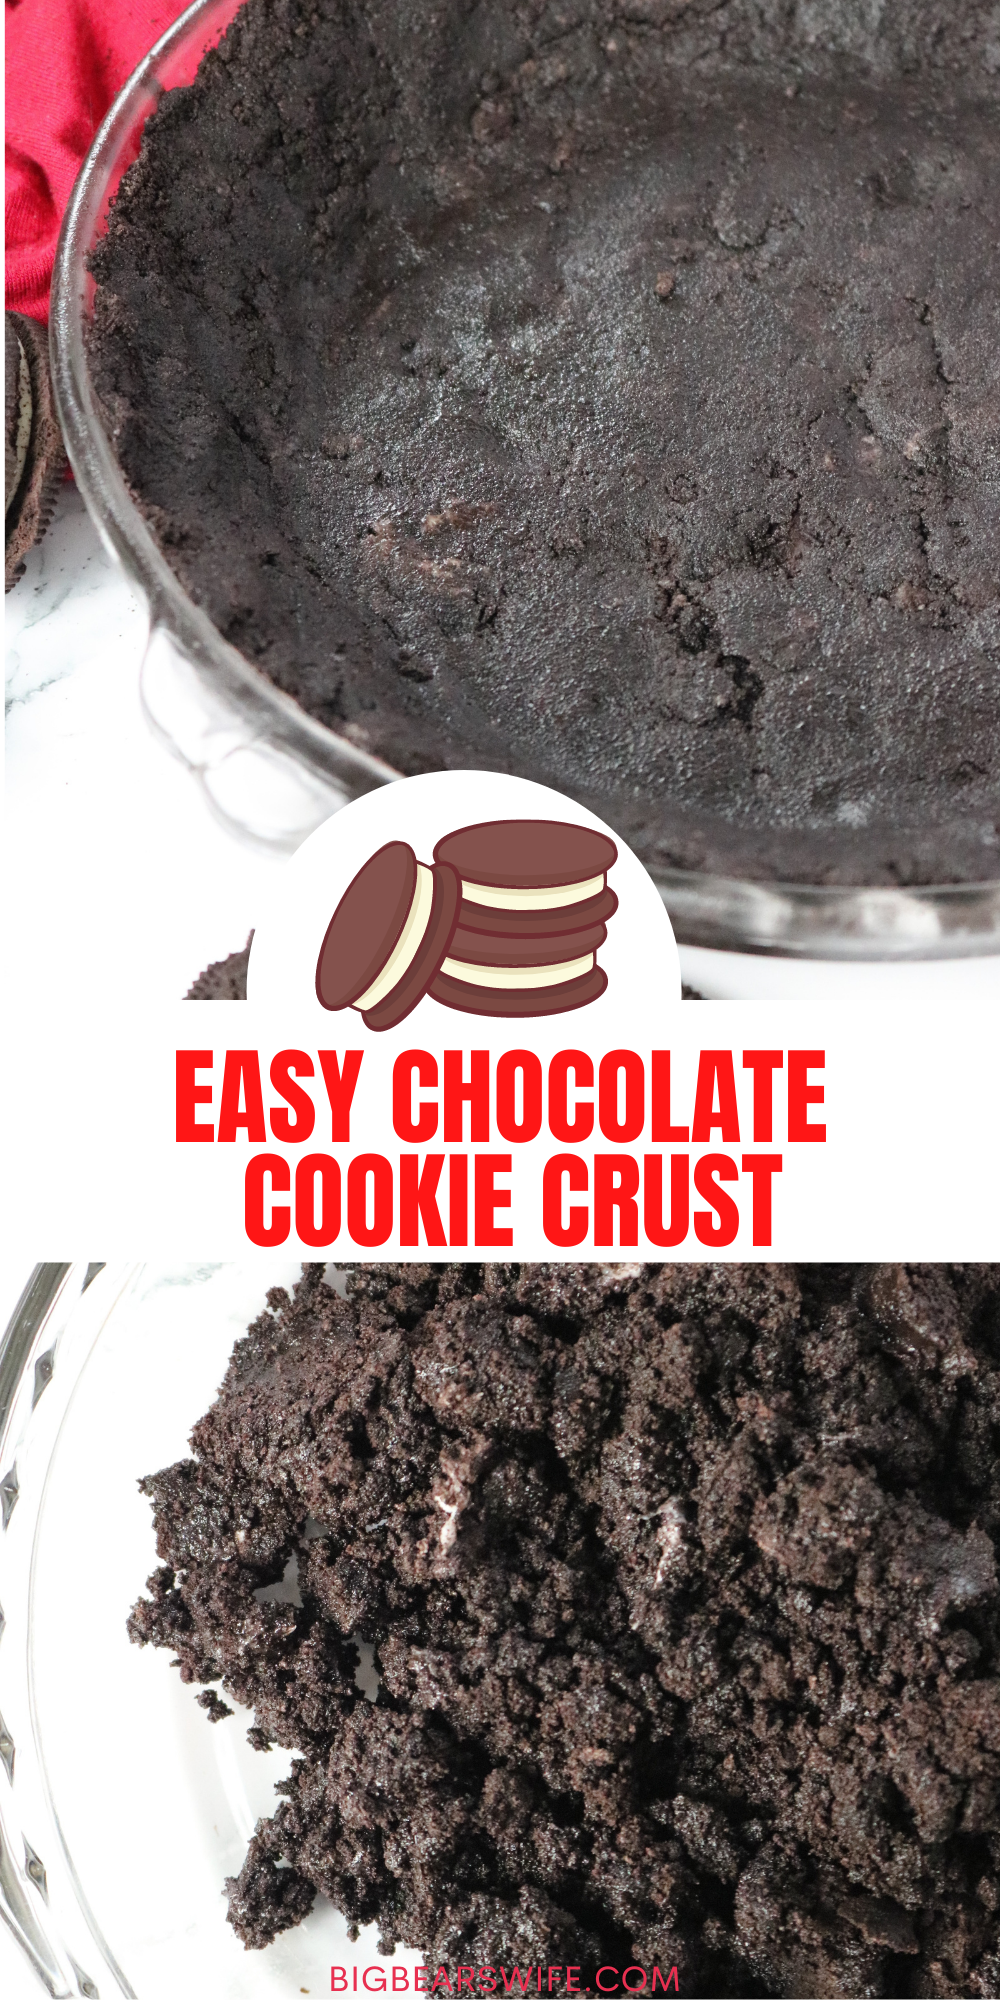 Two ingredients is all it takes to create this Easy Chocolate Cookie Crust at home! Perfect for Bake or No Bake Pie Options! This Oreo cookie crust is so delicious and easy to make! Easy Chocolate Cookie Crust - Bake or No Bake Options via @bigbearswife